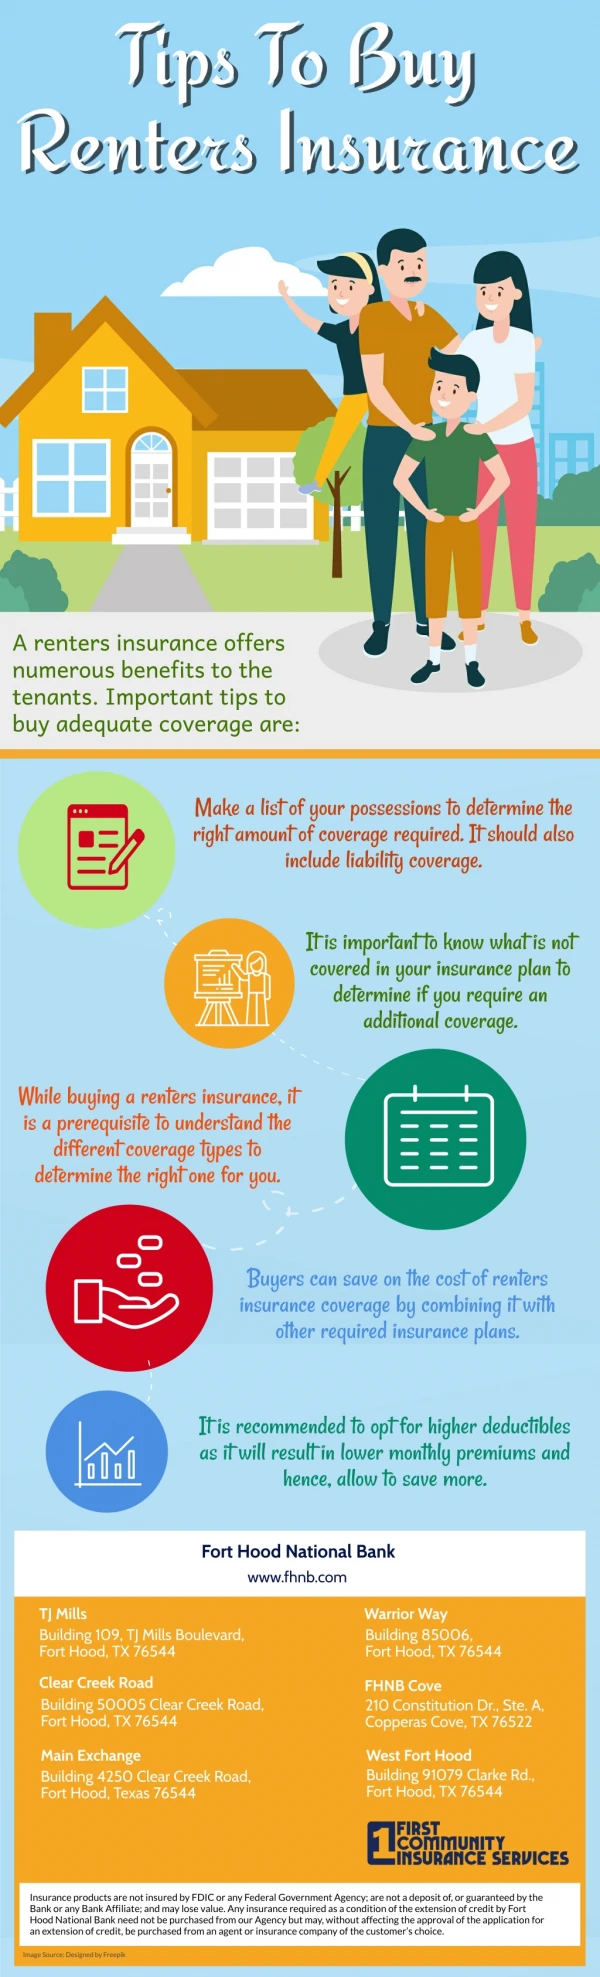 Tips To Buy Renters Insurance